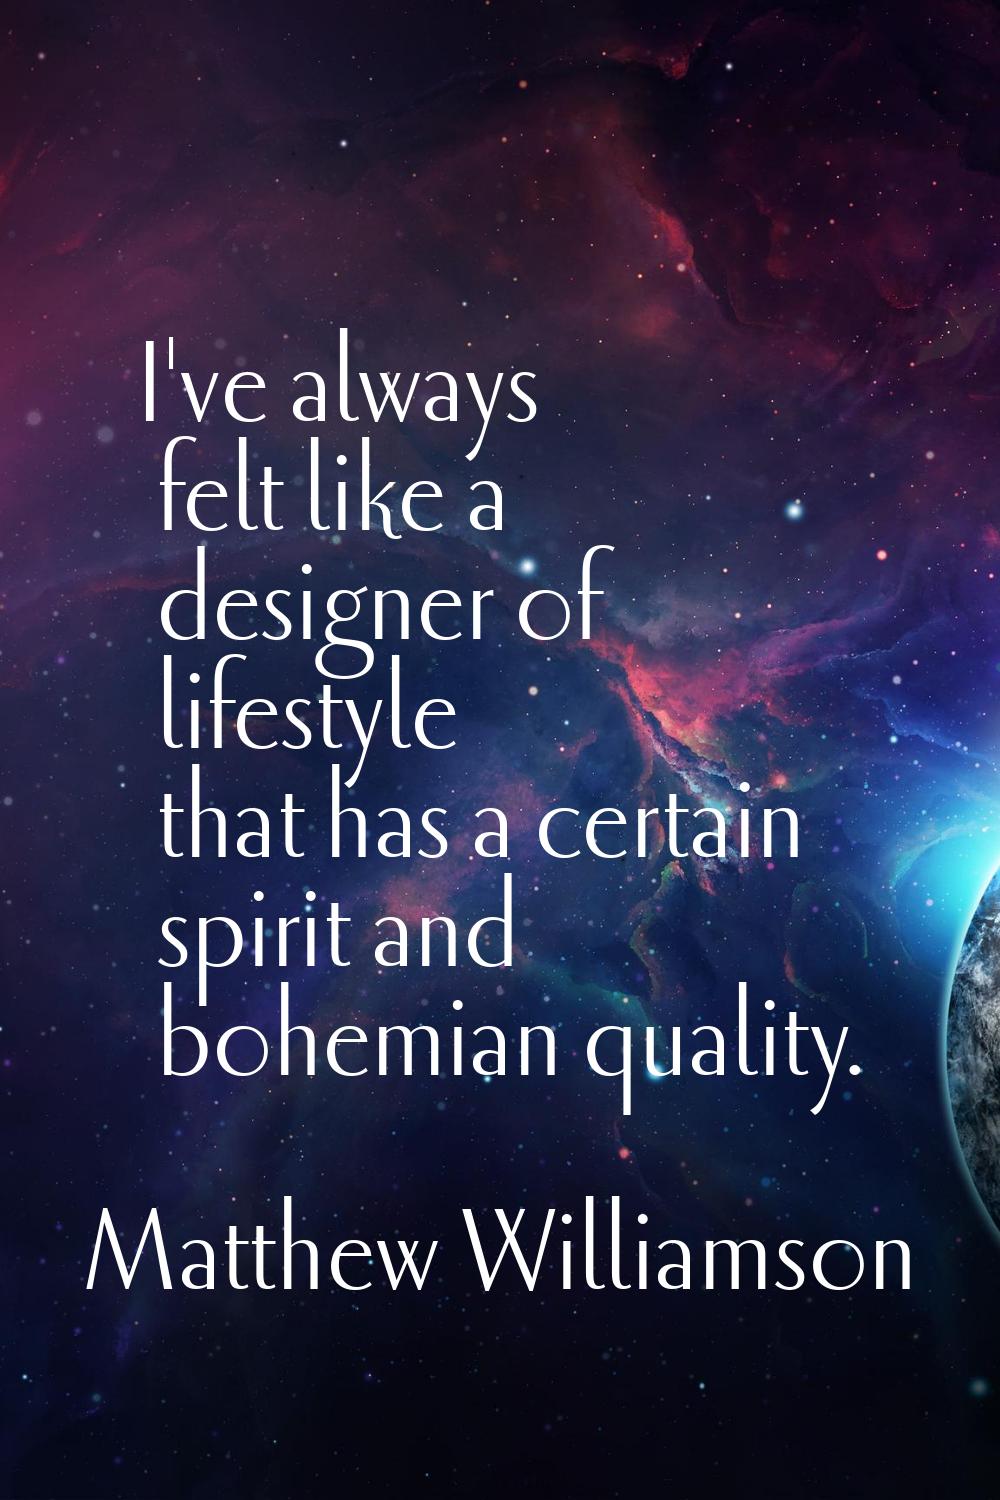 I've always felt like a designer of lifestyle that has a certain spirit and bohemian quality.